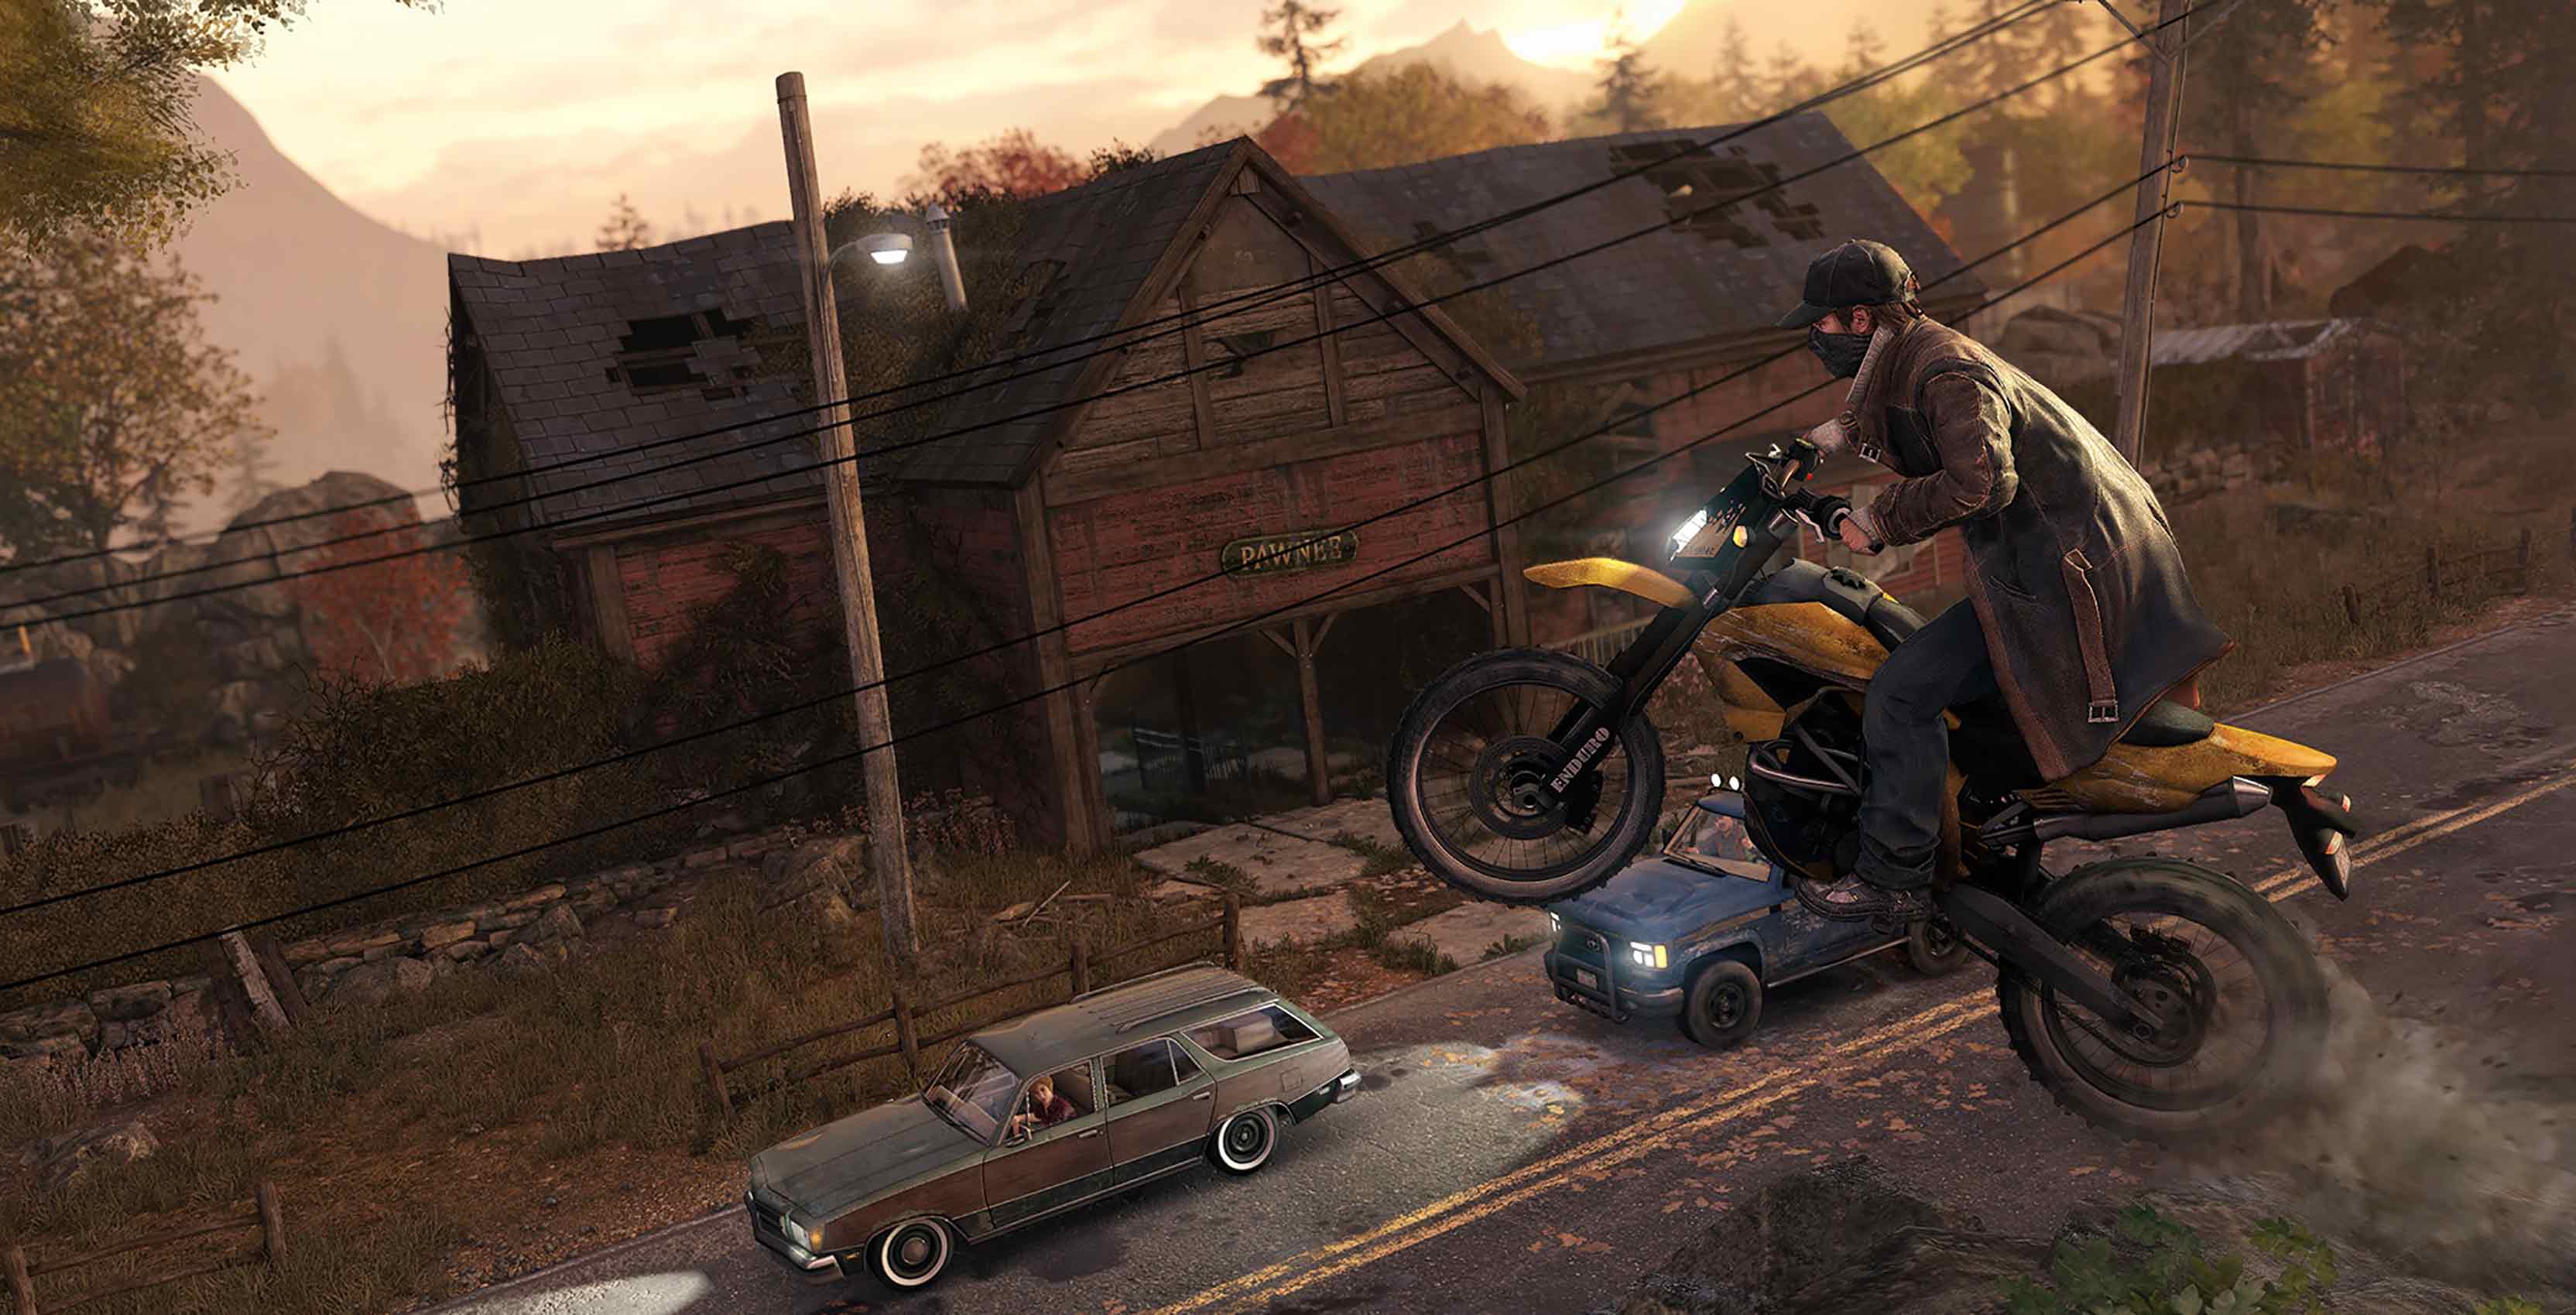 Aiden Pearce on a motorcycle